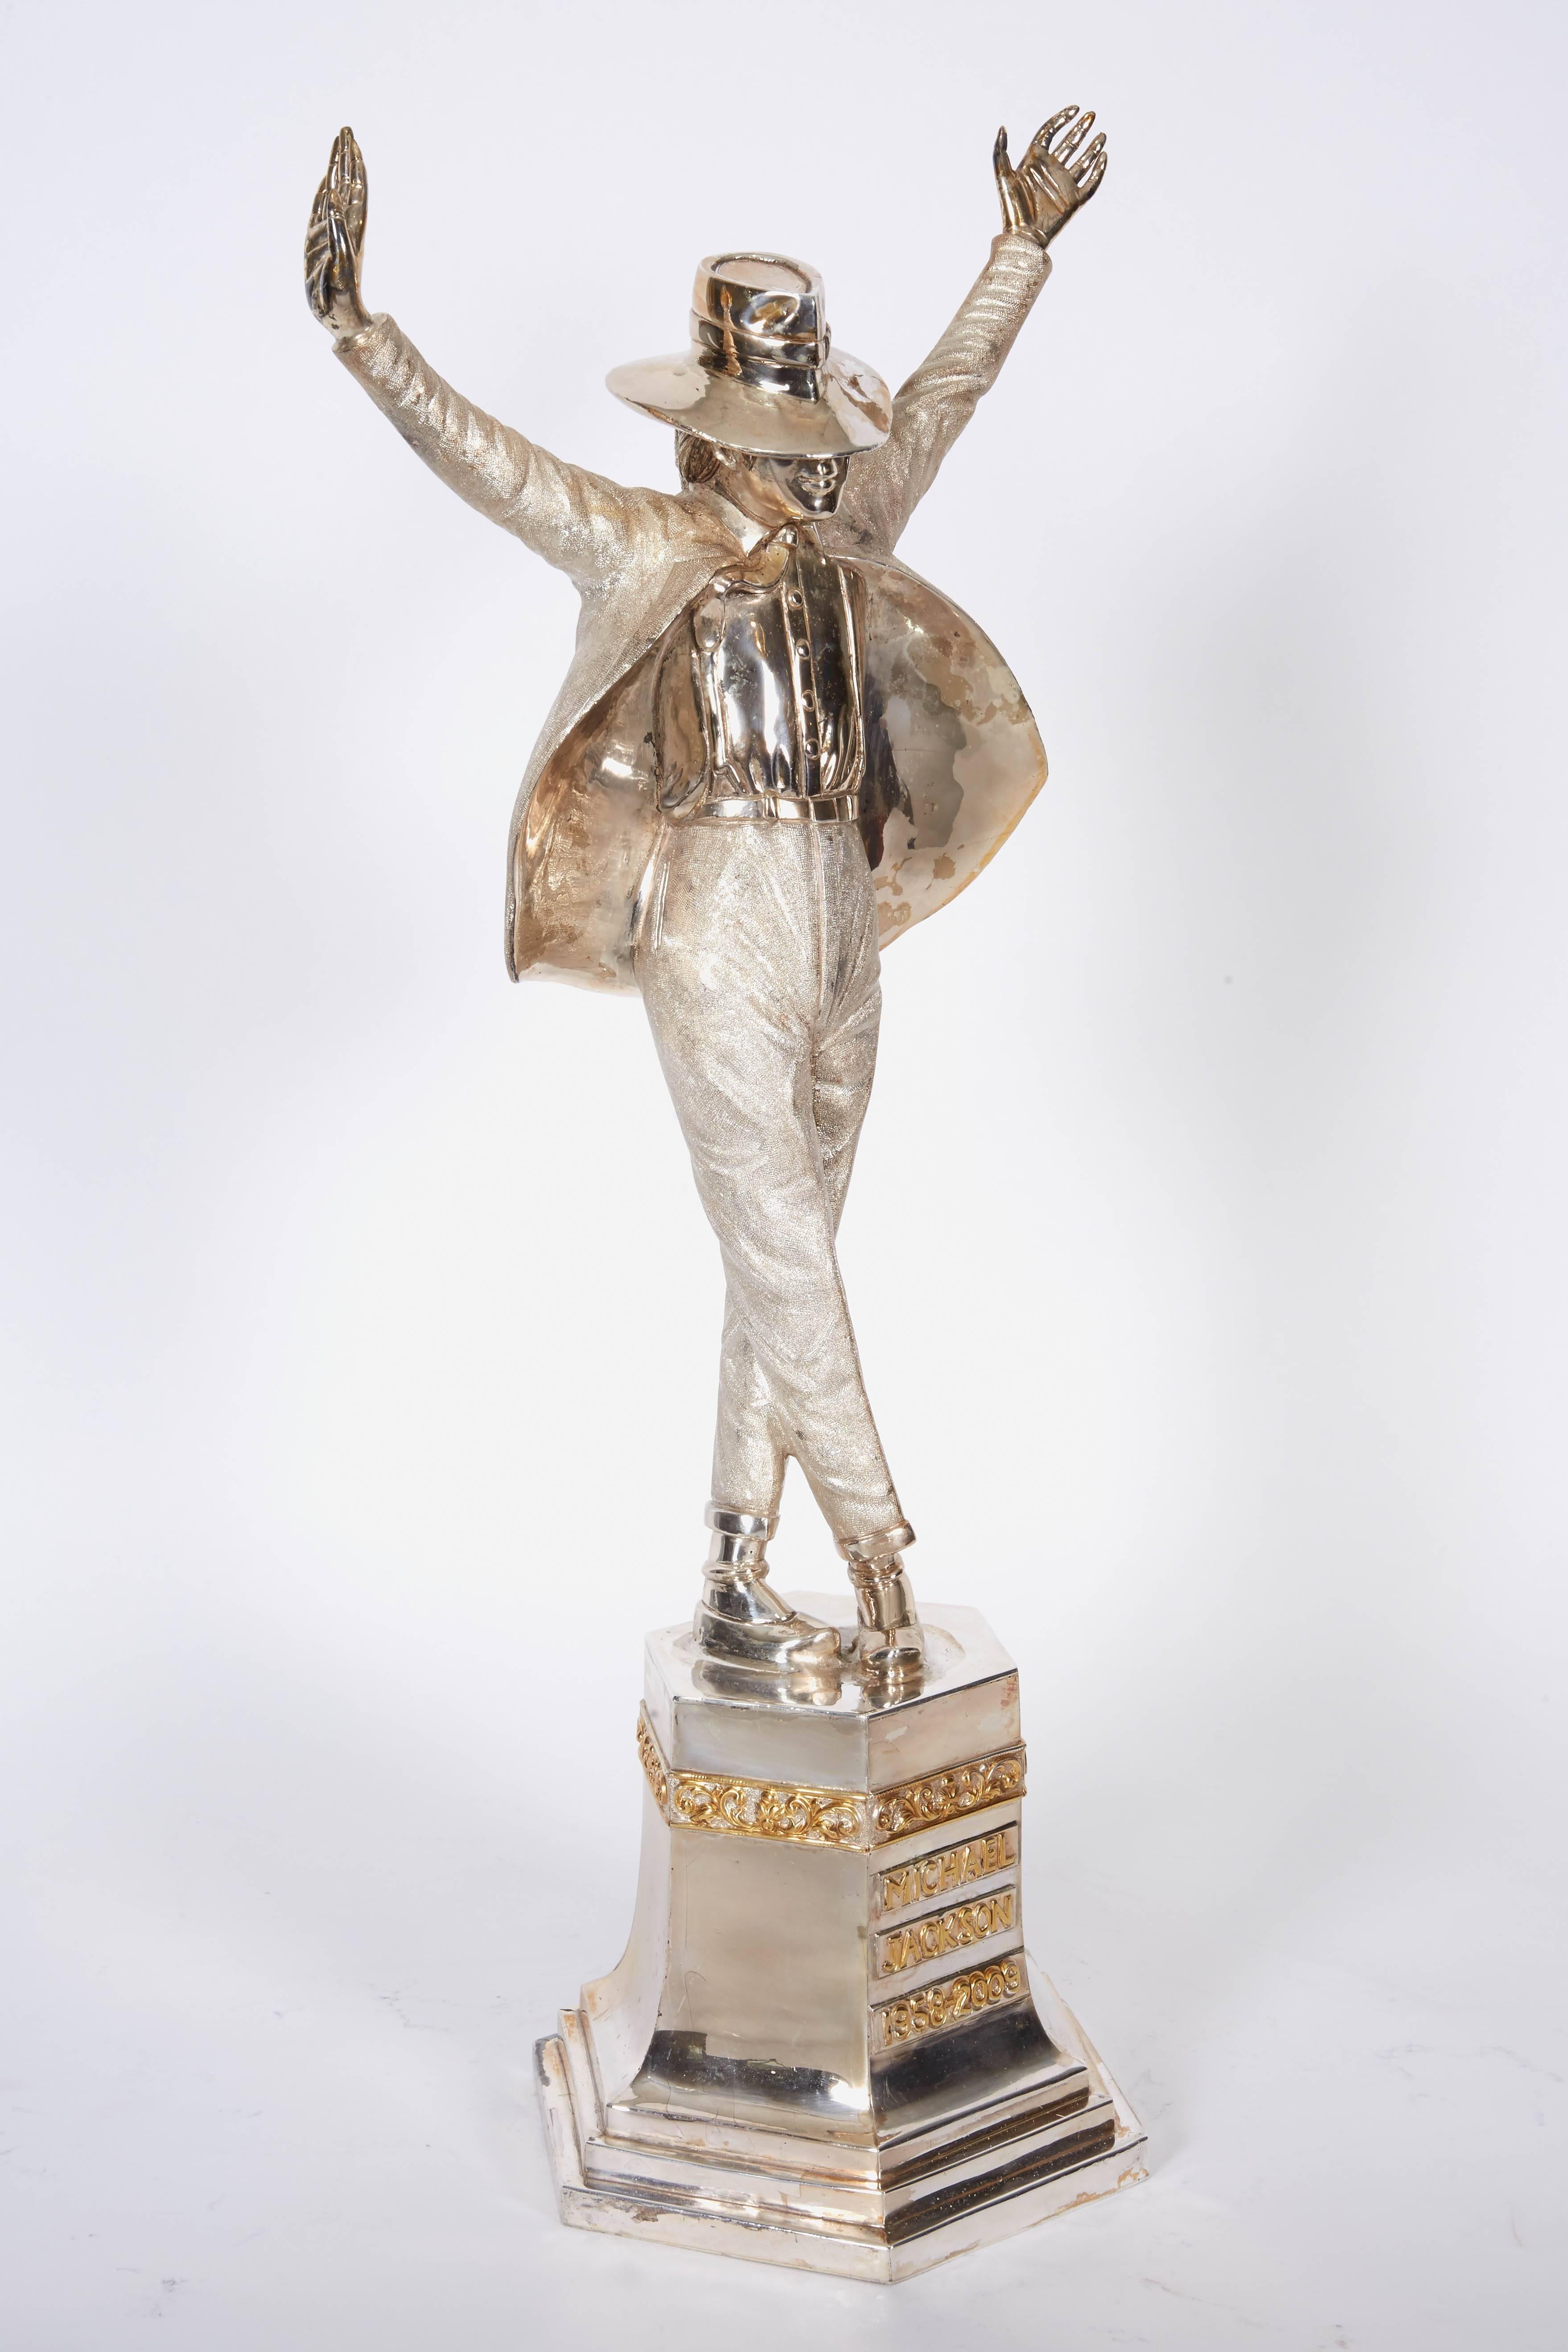 Large Solid Silver Figure Statue of Michael Jackson 